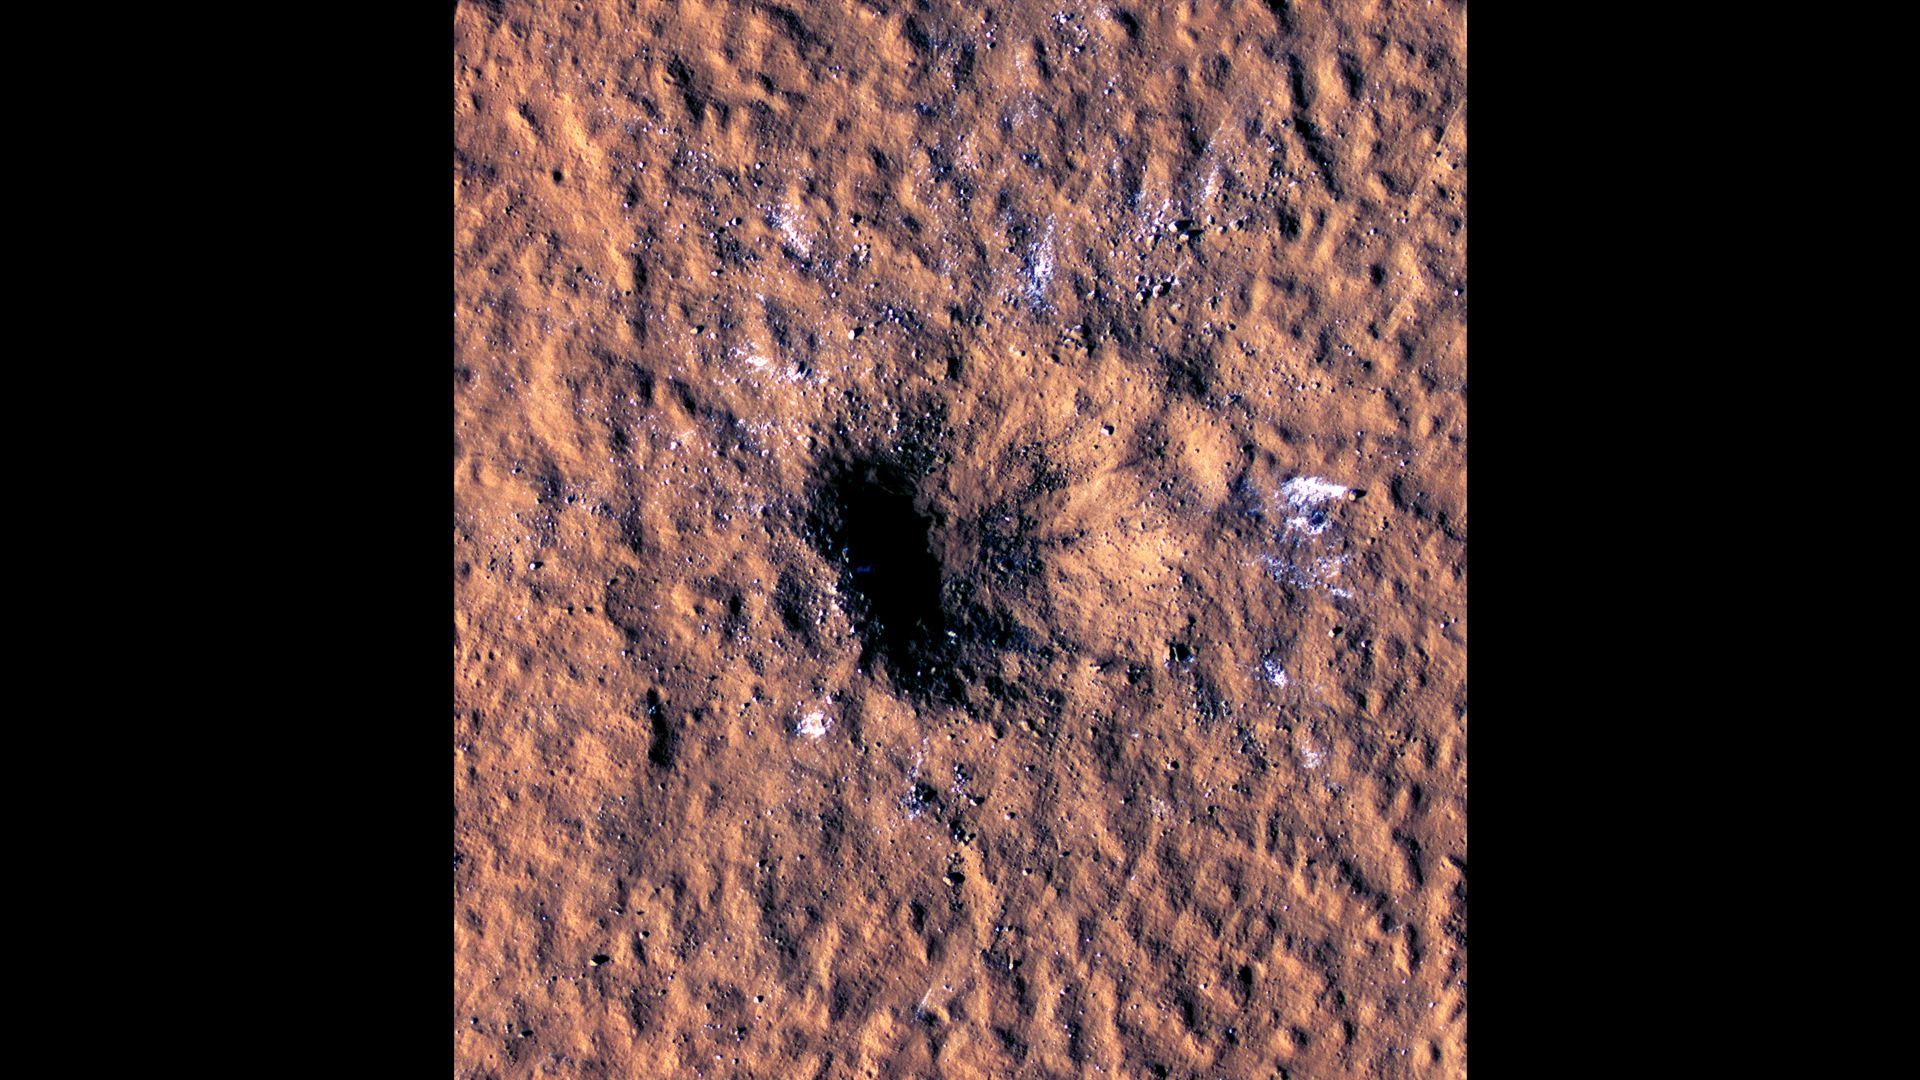 White chunks of ice stand out on the red sands of Mars surrounding this fresh impact crater.